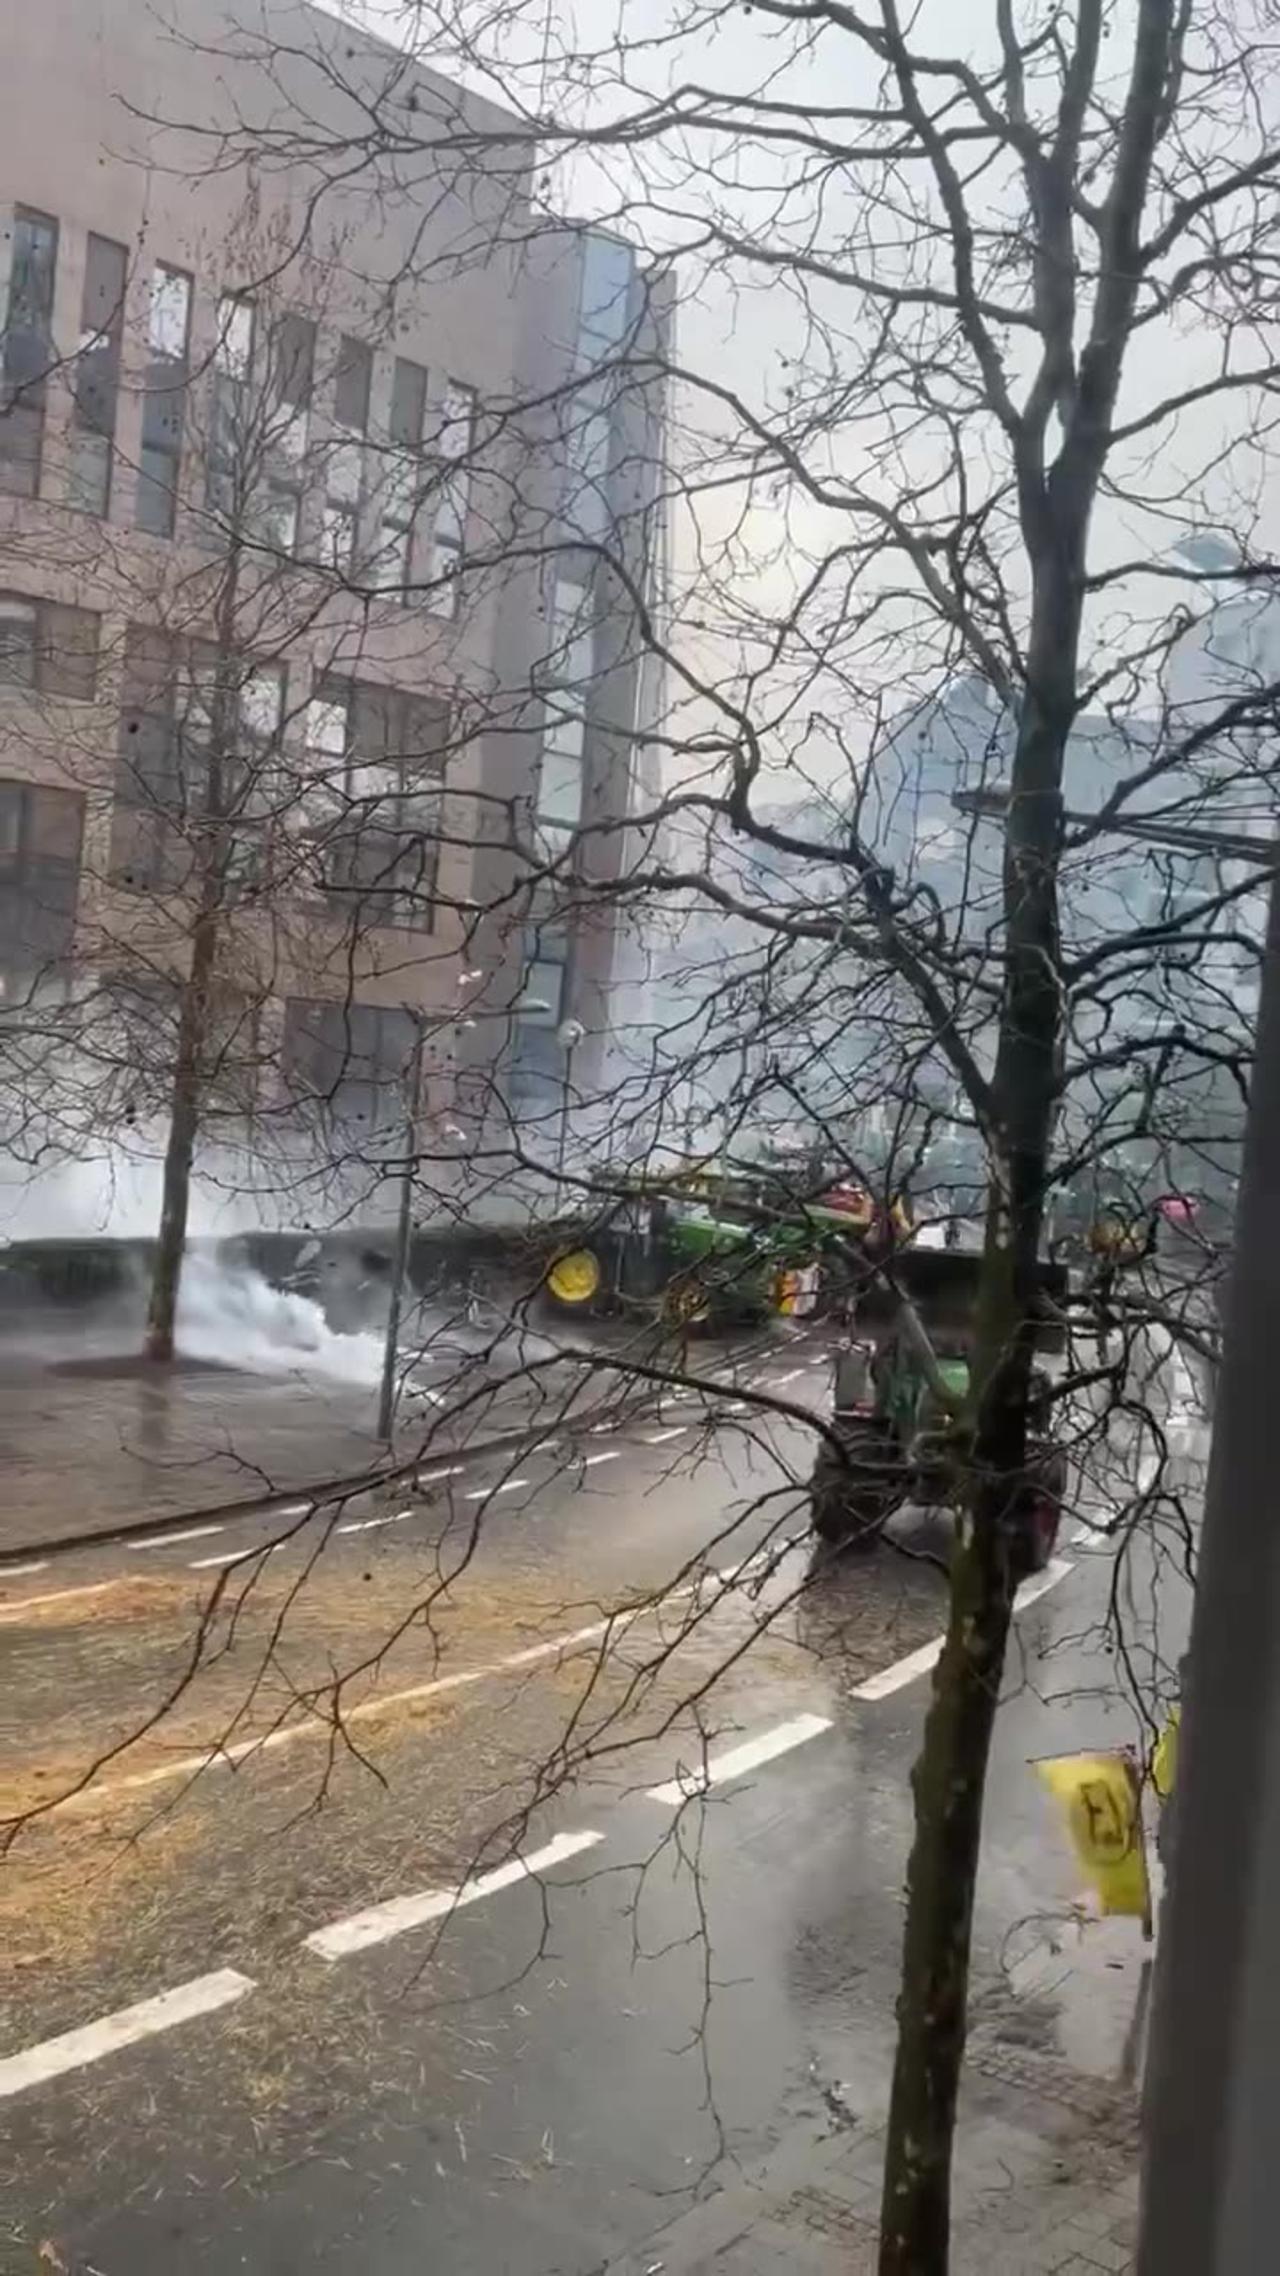 Police in Brussels used tear gas against farmers